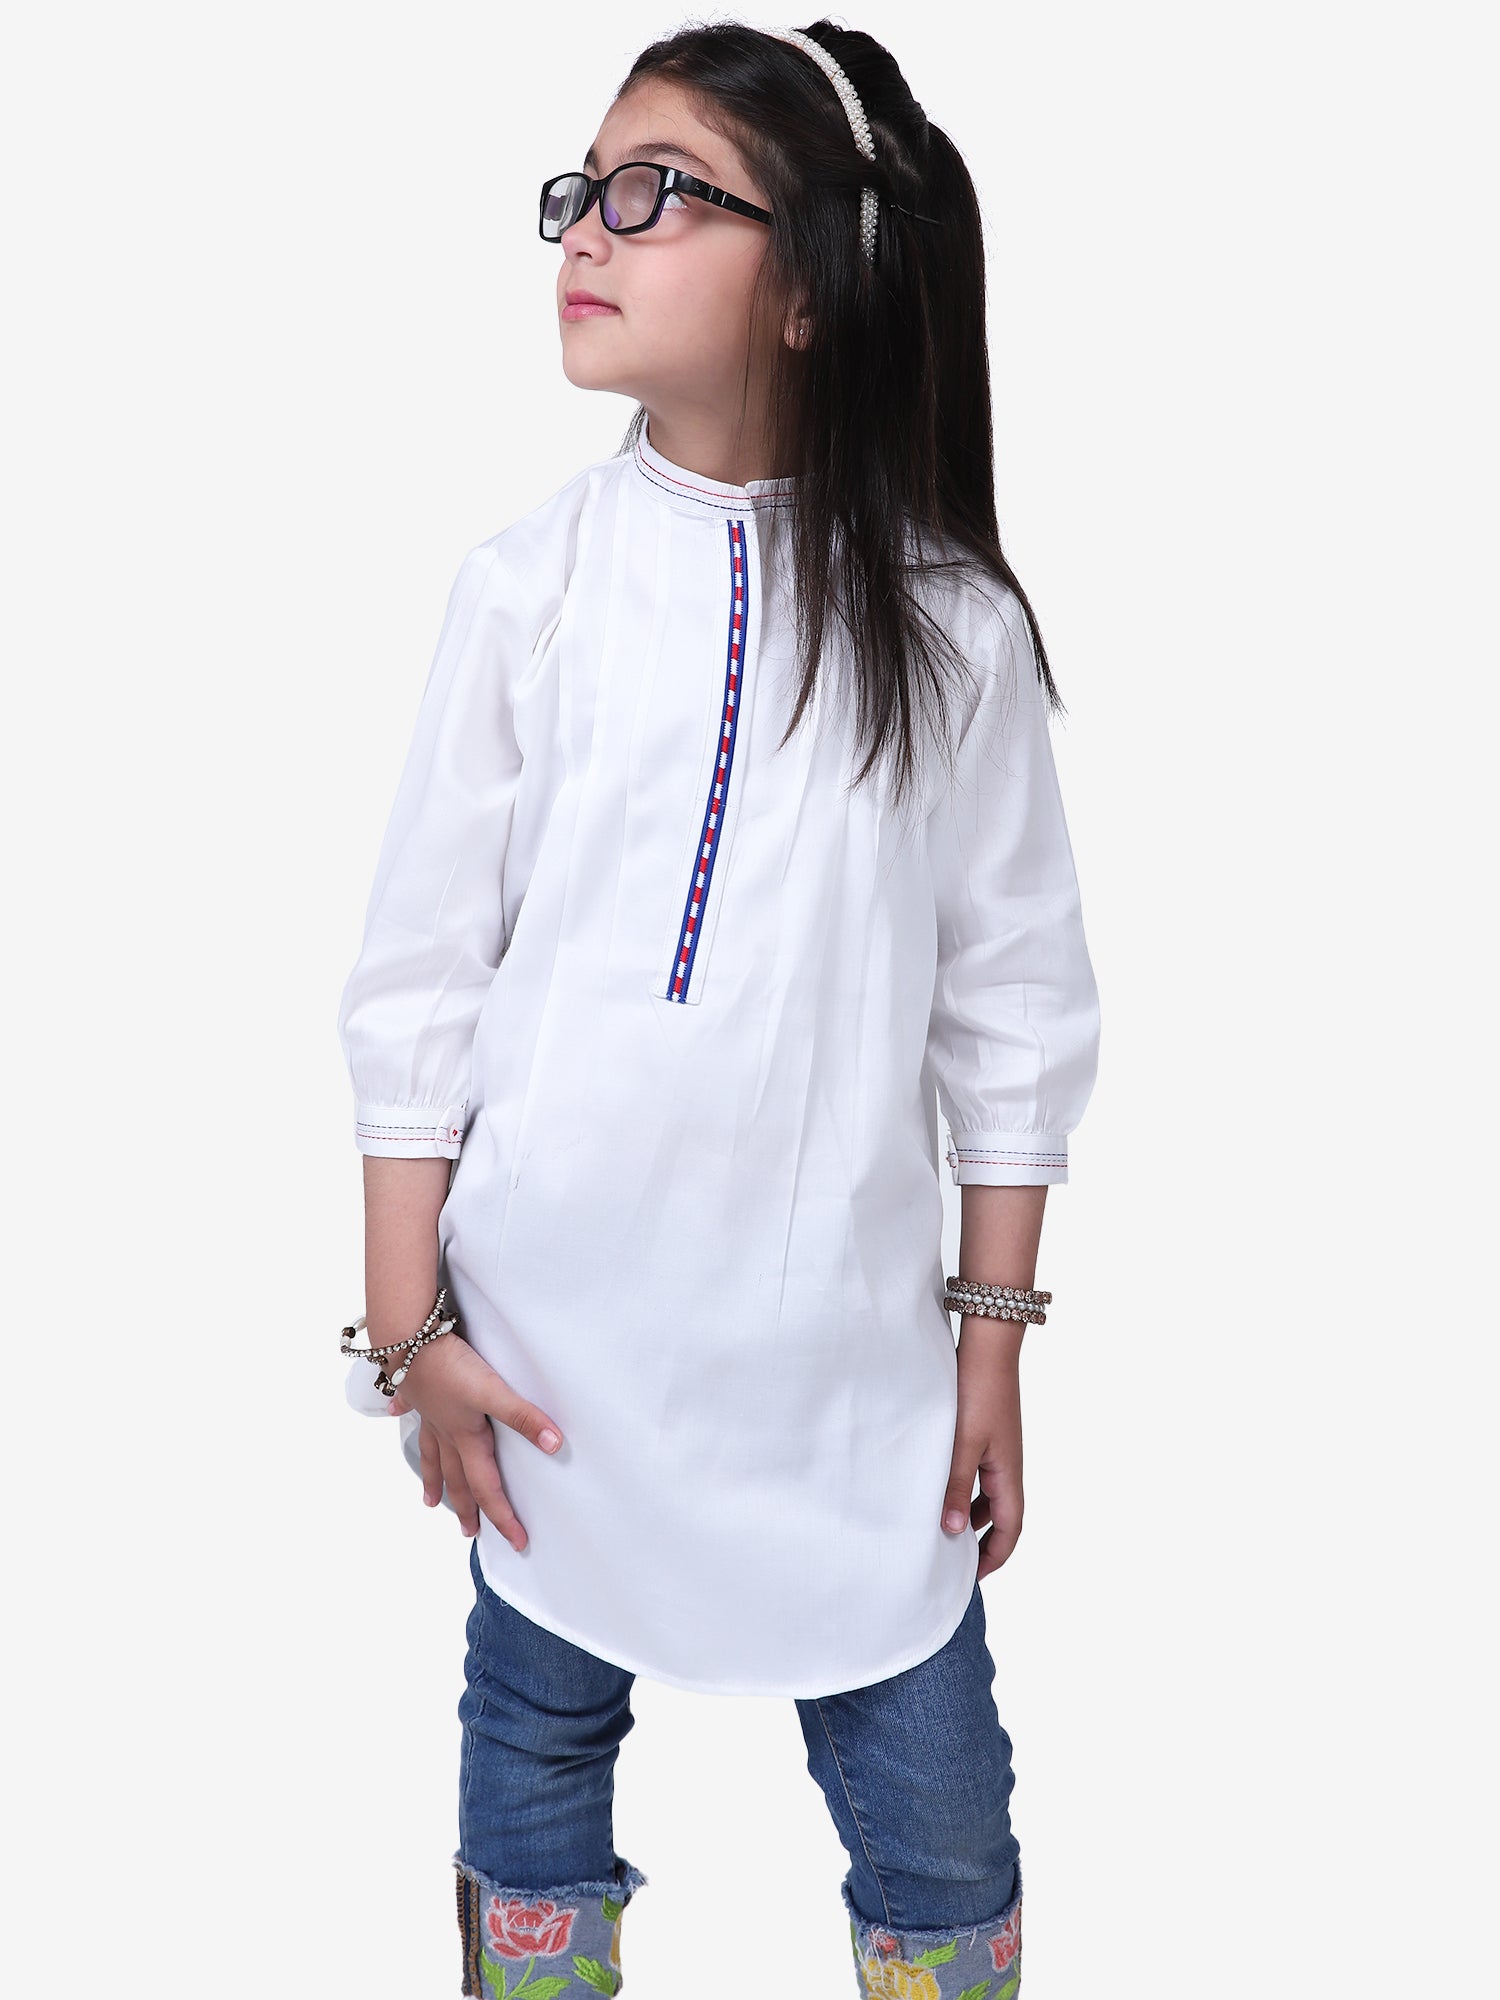 Girls Tunic Top By Velvour ART# VG0018-C - Velvour Shop